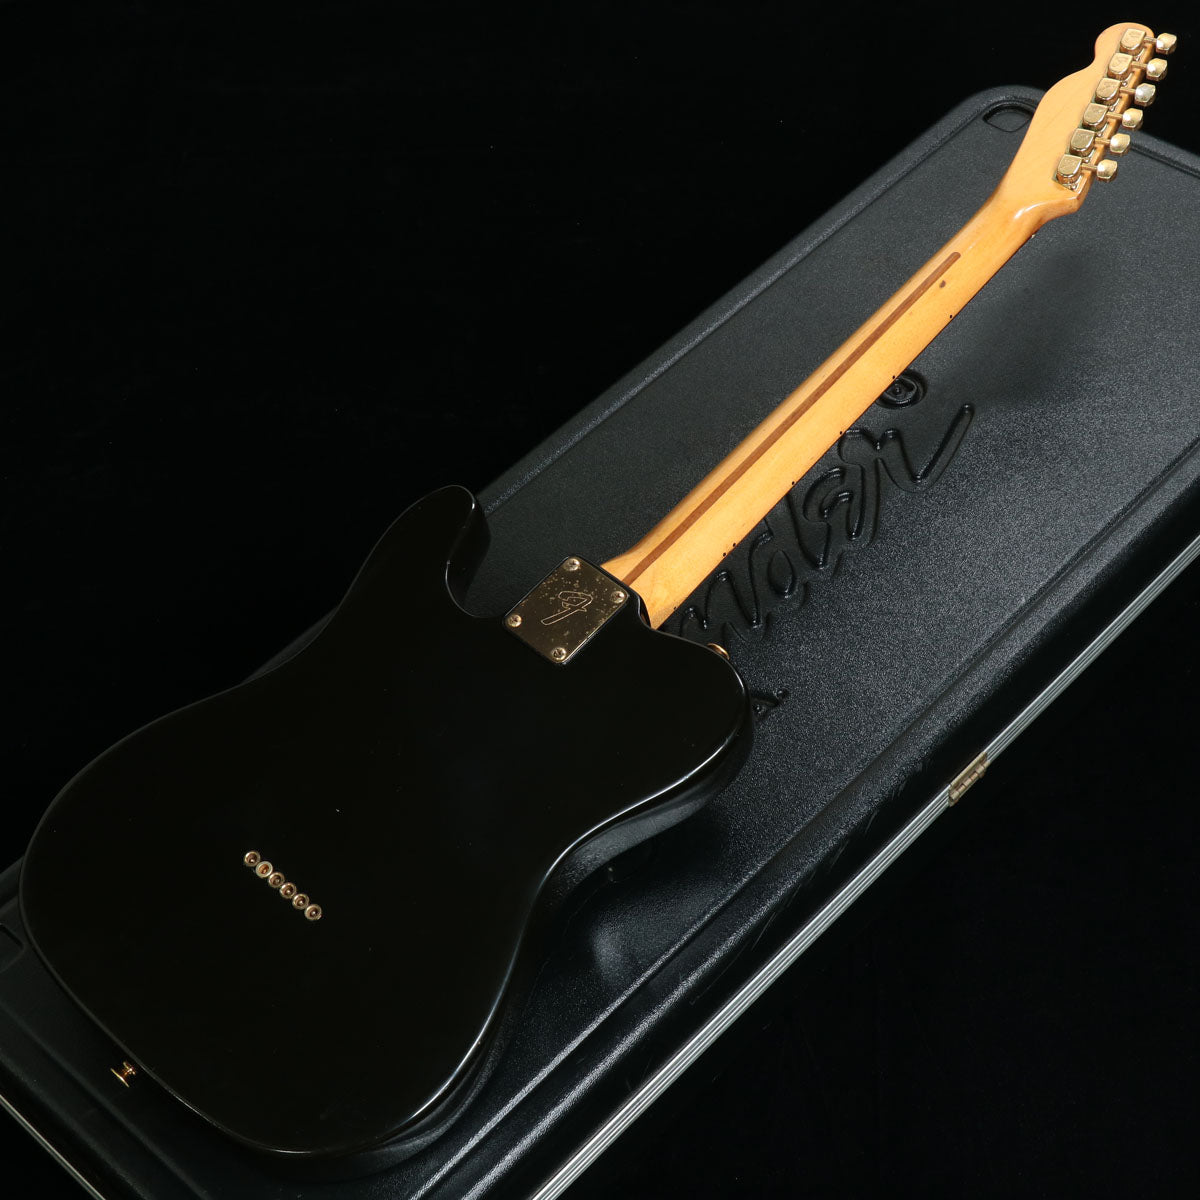 [SN CE 10948] USED FENDER USA / Collectors Edition Black and Gold Telecaster 1982 Vintage [08]